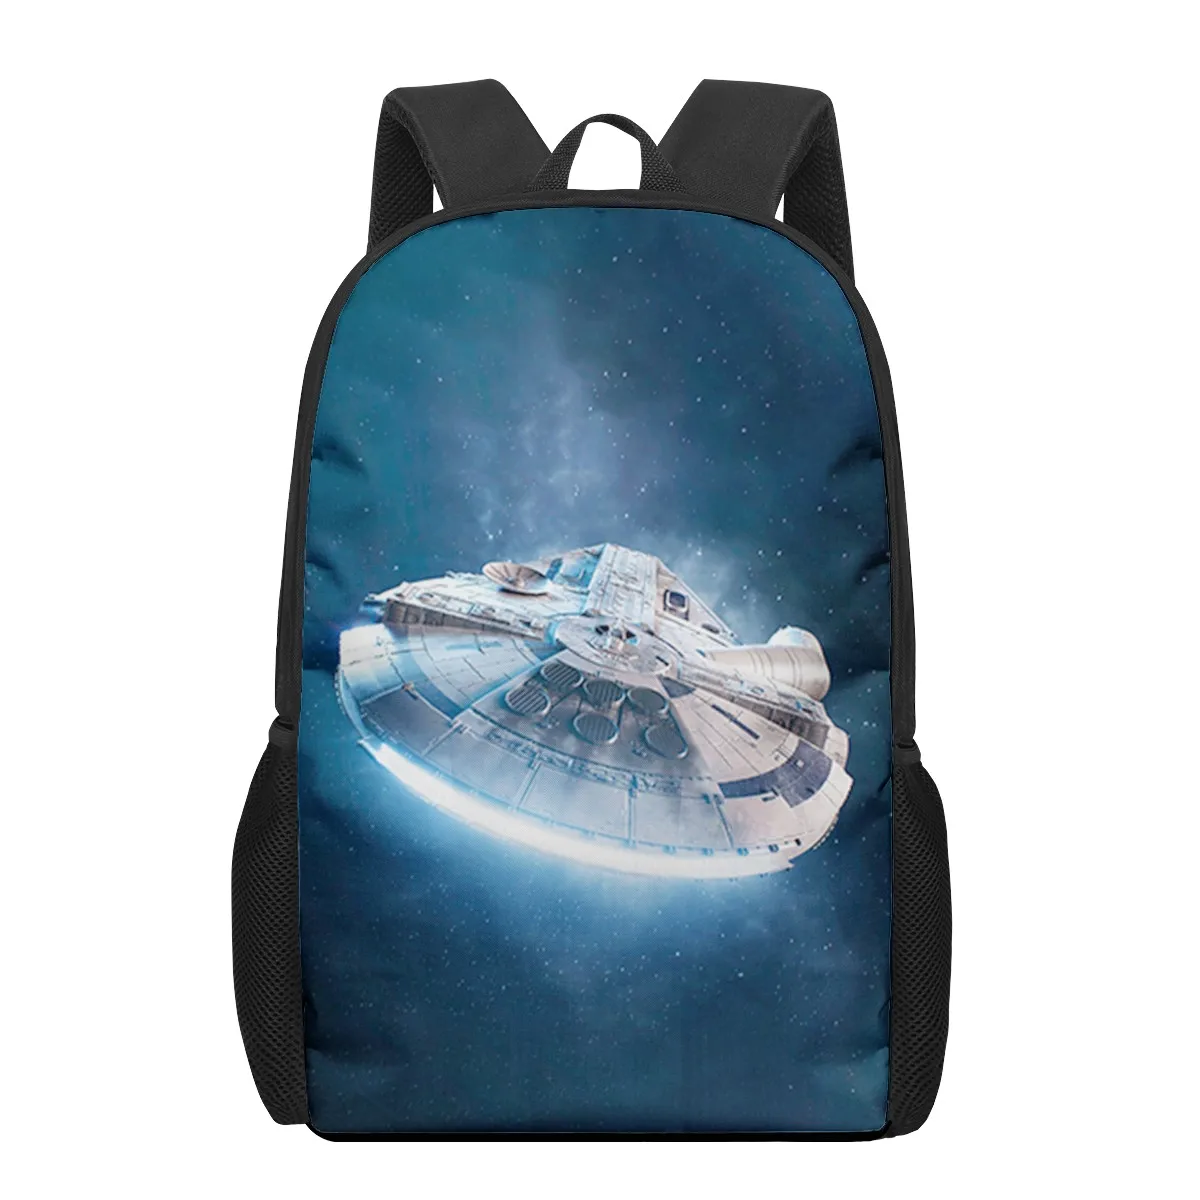 

Outer Space Spaceship UFO Print School Bags for Boys Girls Primary Students Backpacks Kids Bag Satchel Large Capacity Backpack